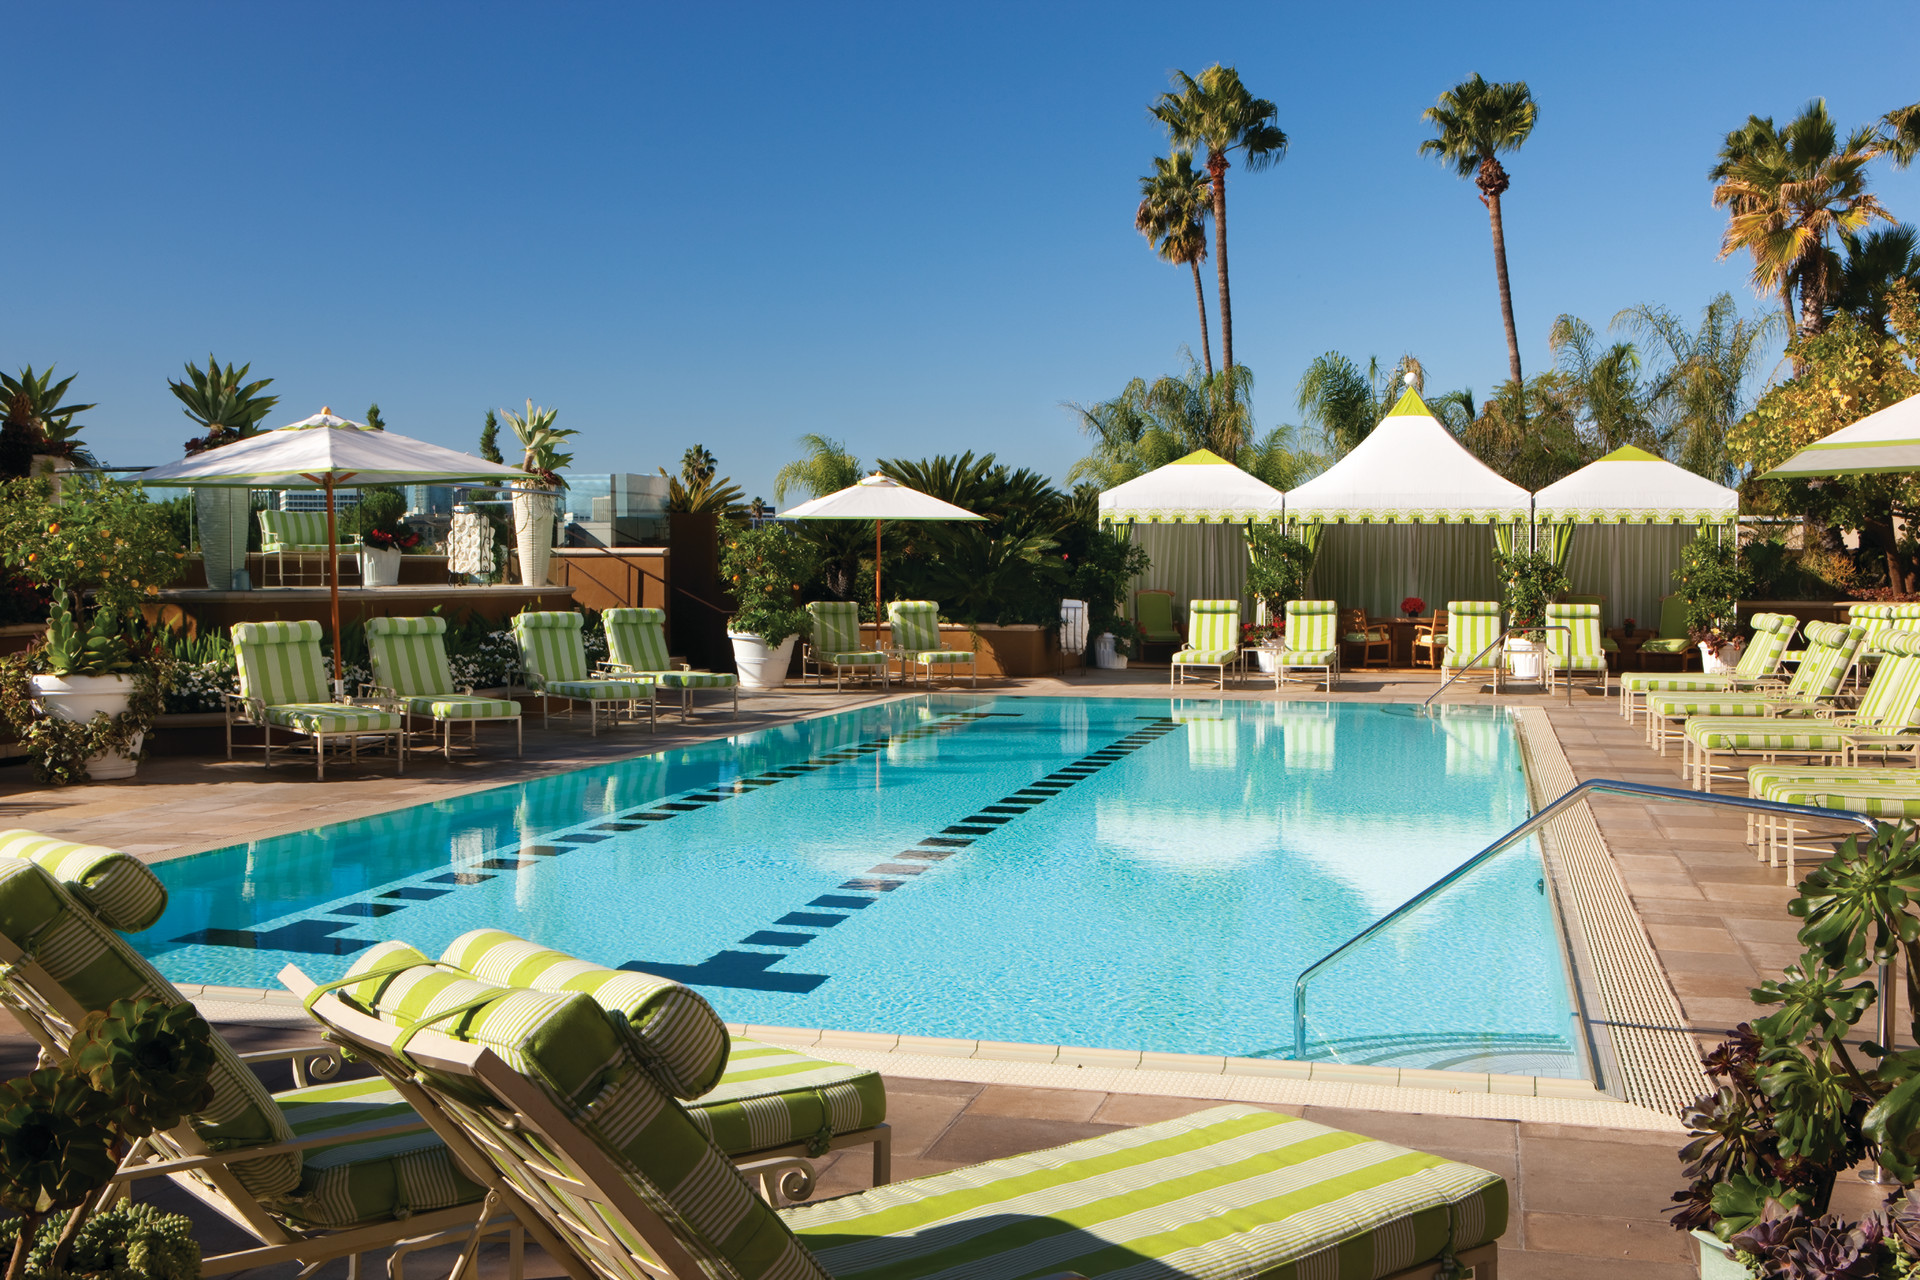 Best Adults-Only Hotel Pools of Southern California - California Beaches